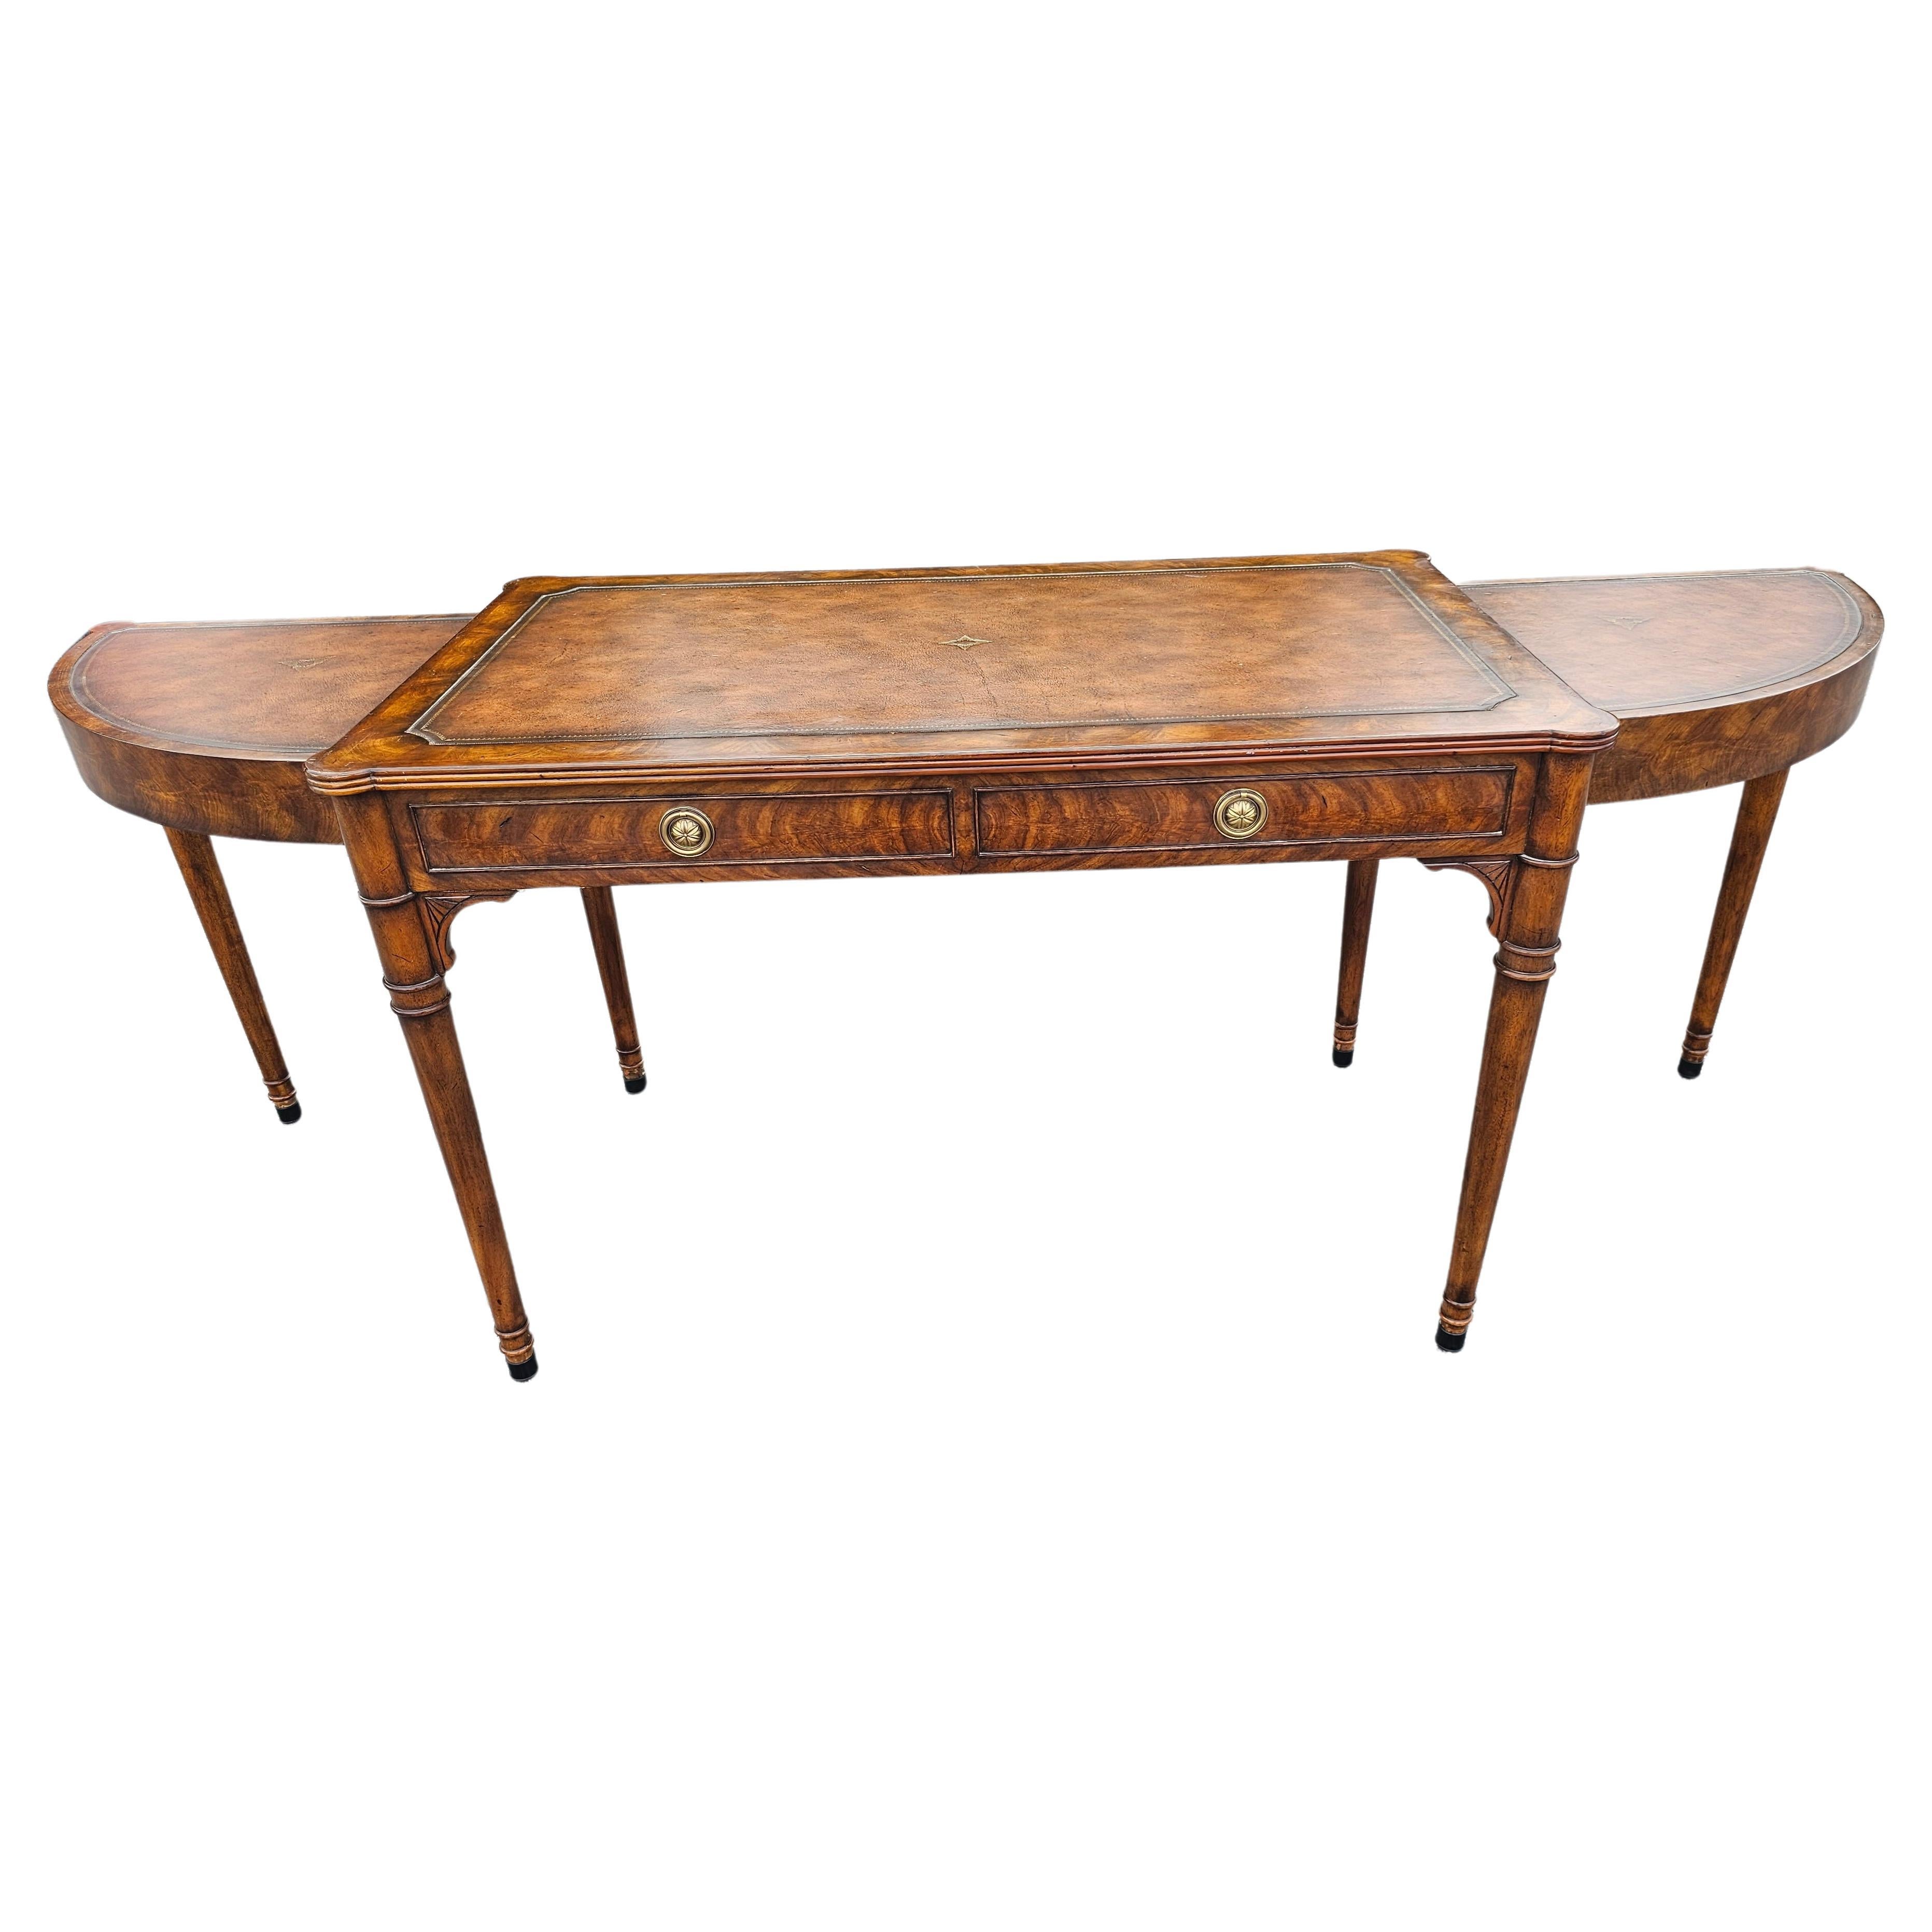 An Exquisite Theodore Alexander Extendable Mahogany and Tooled Leather Top Writing Desk. Banded and Tooled top. Two drawers and faux drawers on front and back. Measures 79